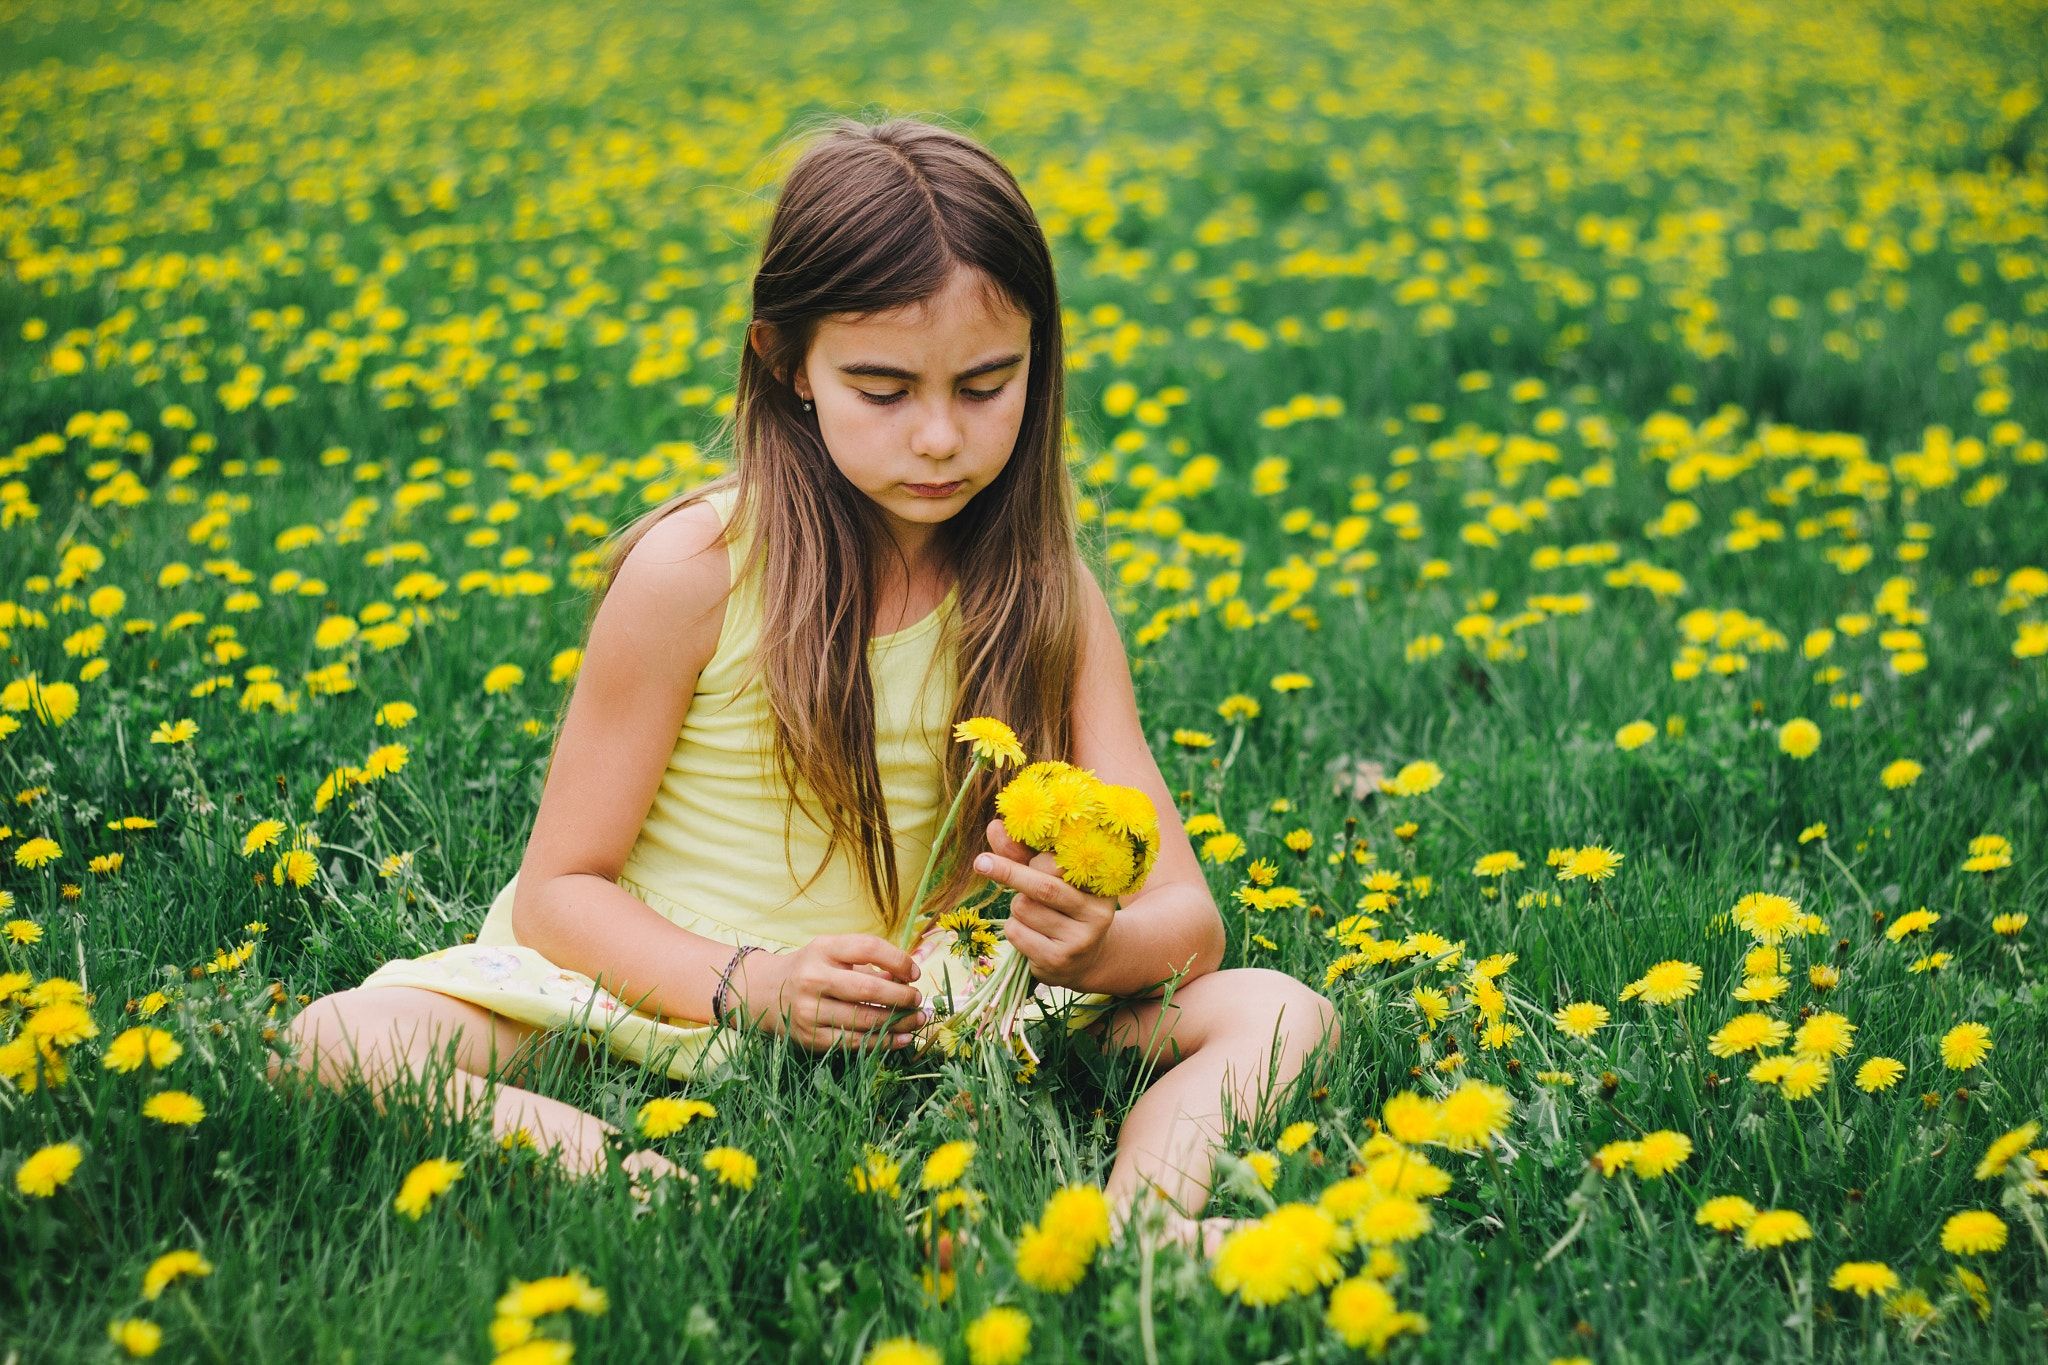 Untitled - Little girl collecting dandelion flowers. | Pequeninos ...